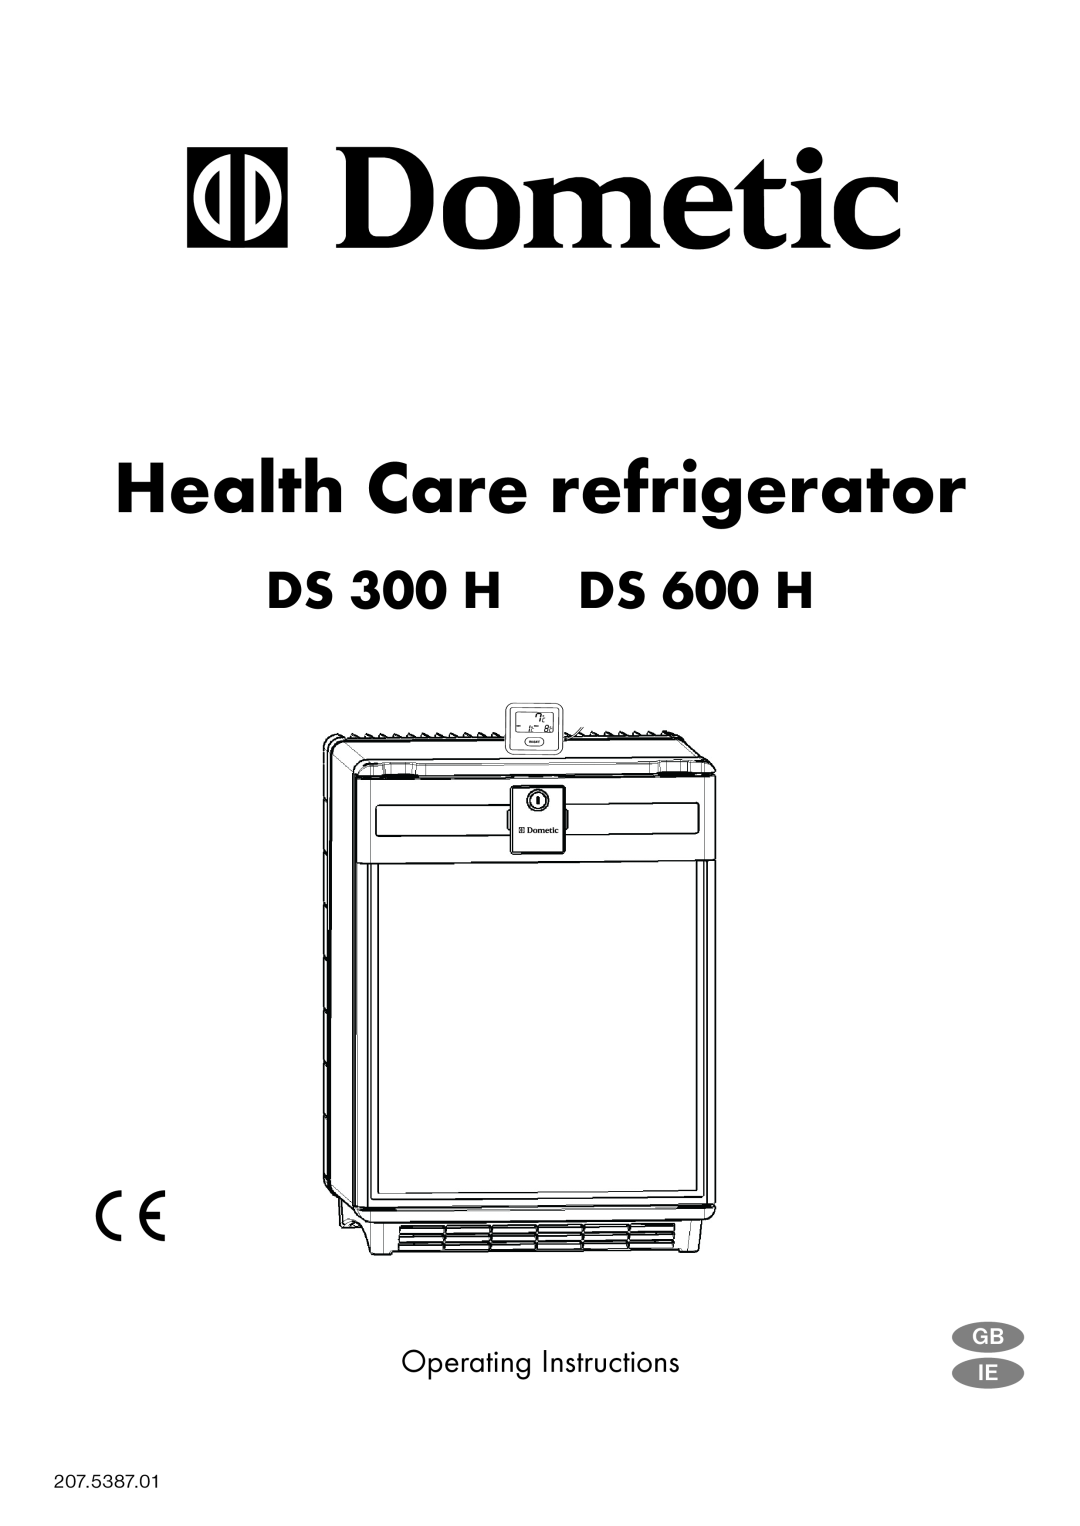 Dometic manual Health Care refrigerator, DS 300 H DS 600 H, Operating Instructions, Gb Ie 